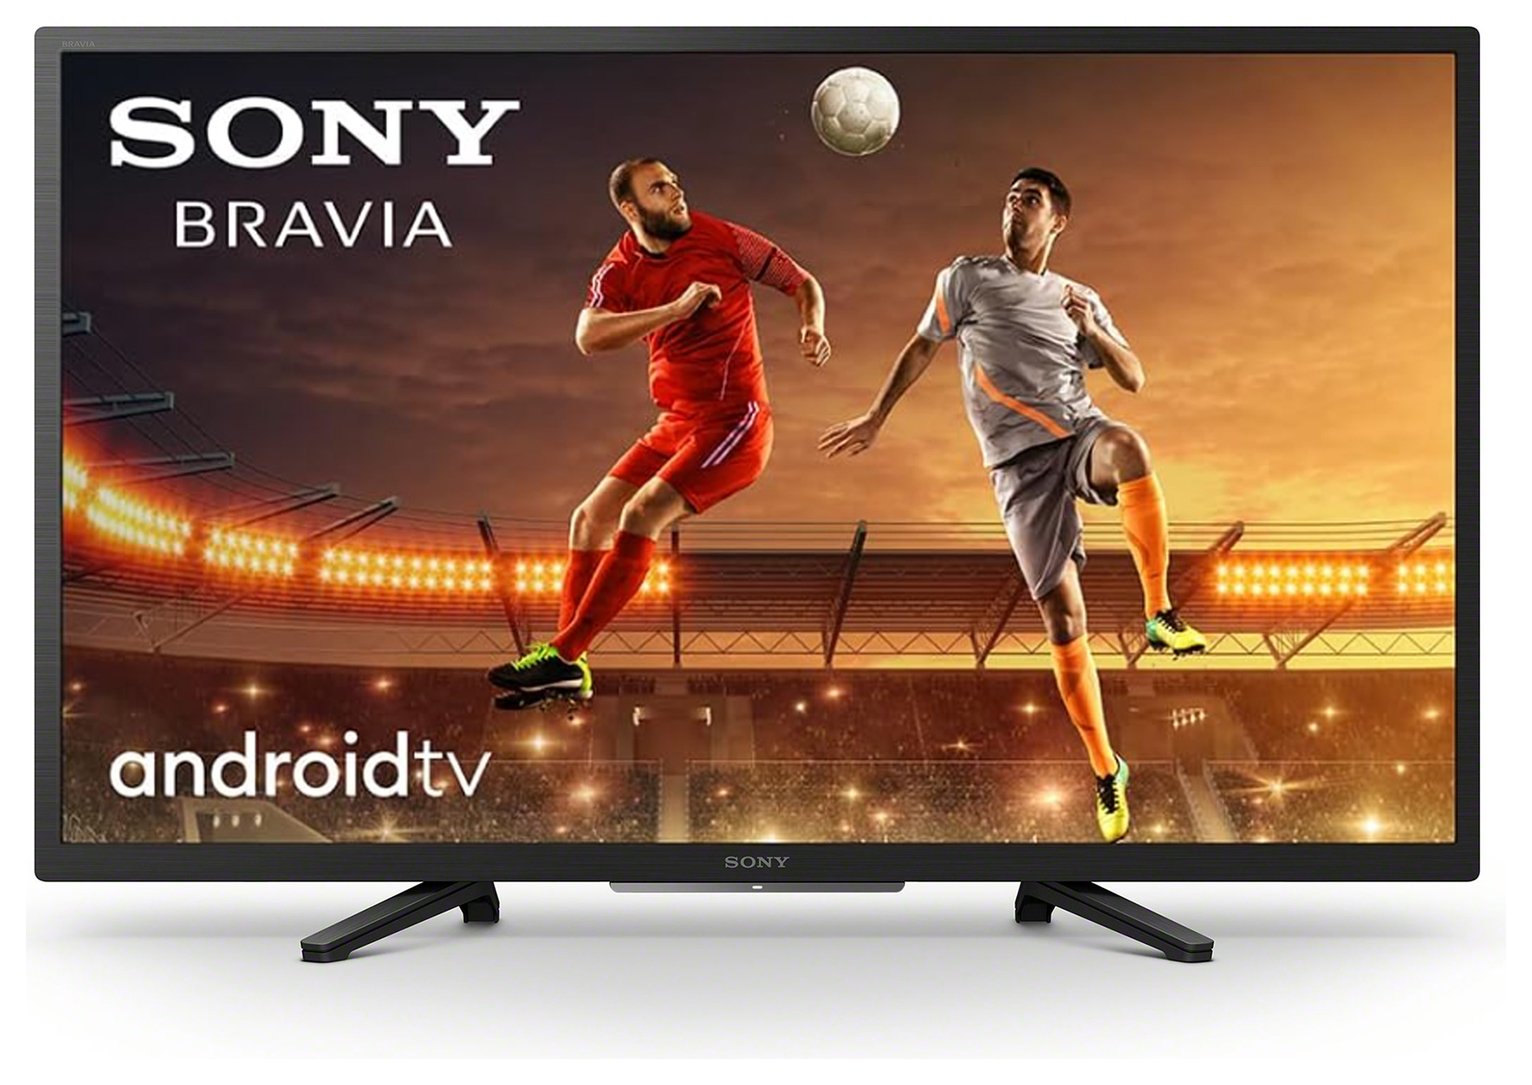 Sony 32 Inch KD32W800PU Smart HD Ready Android Freeview TV